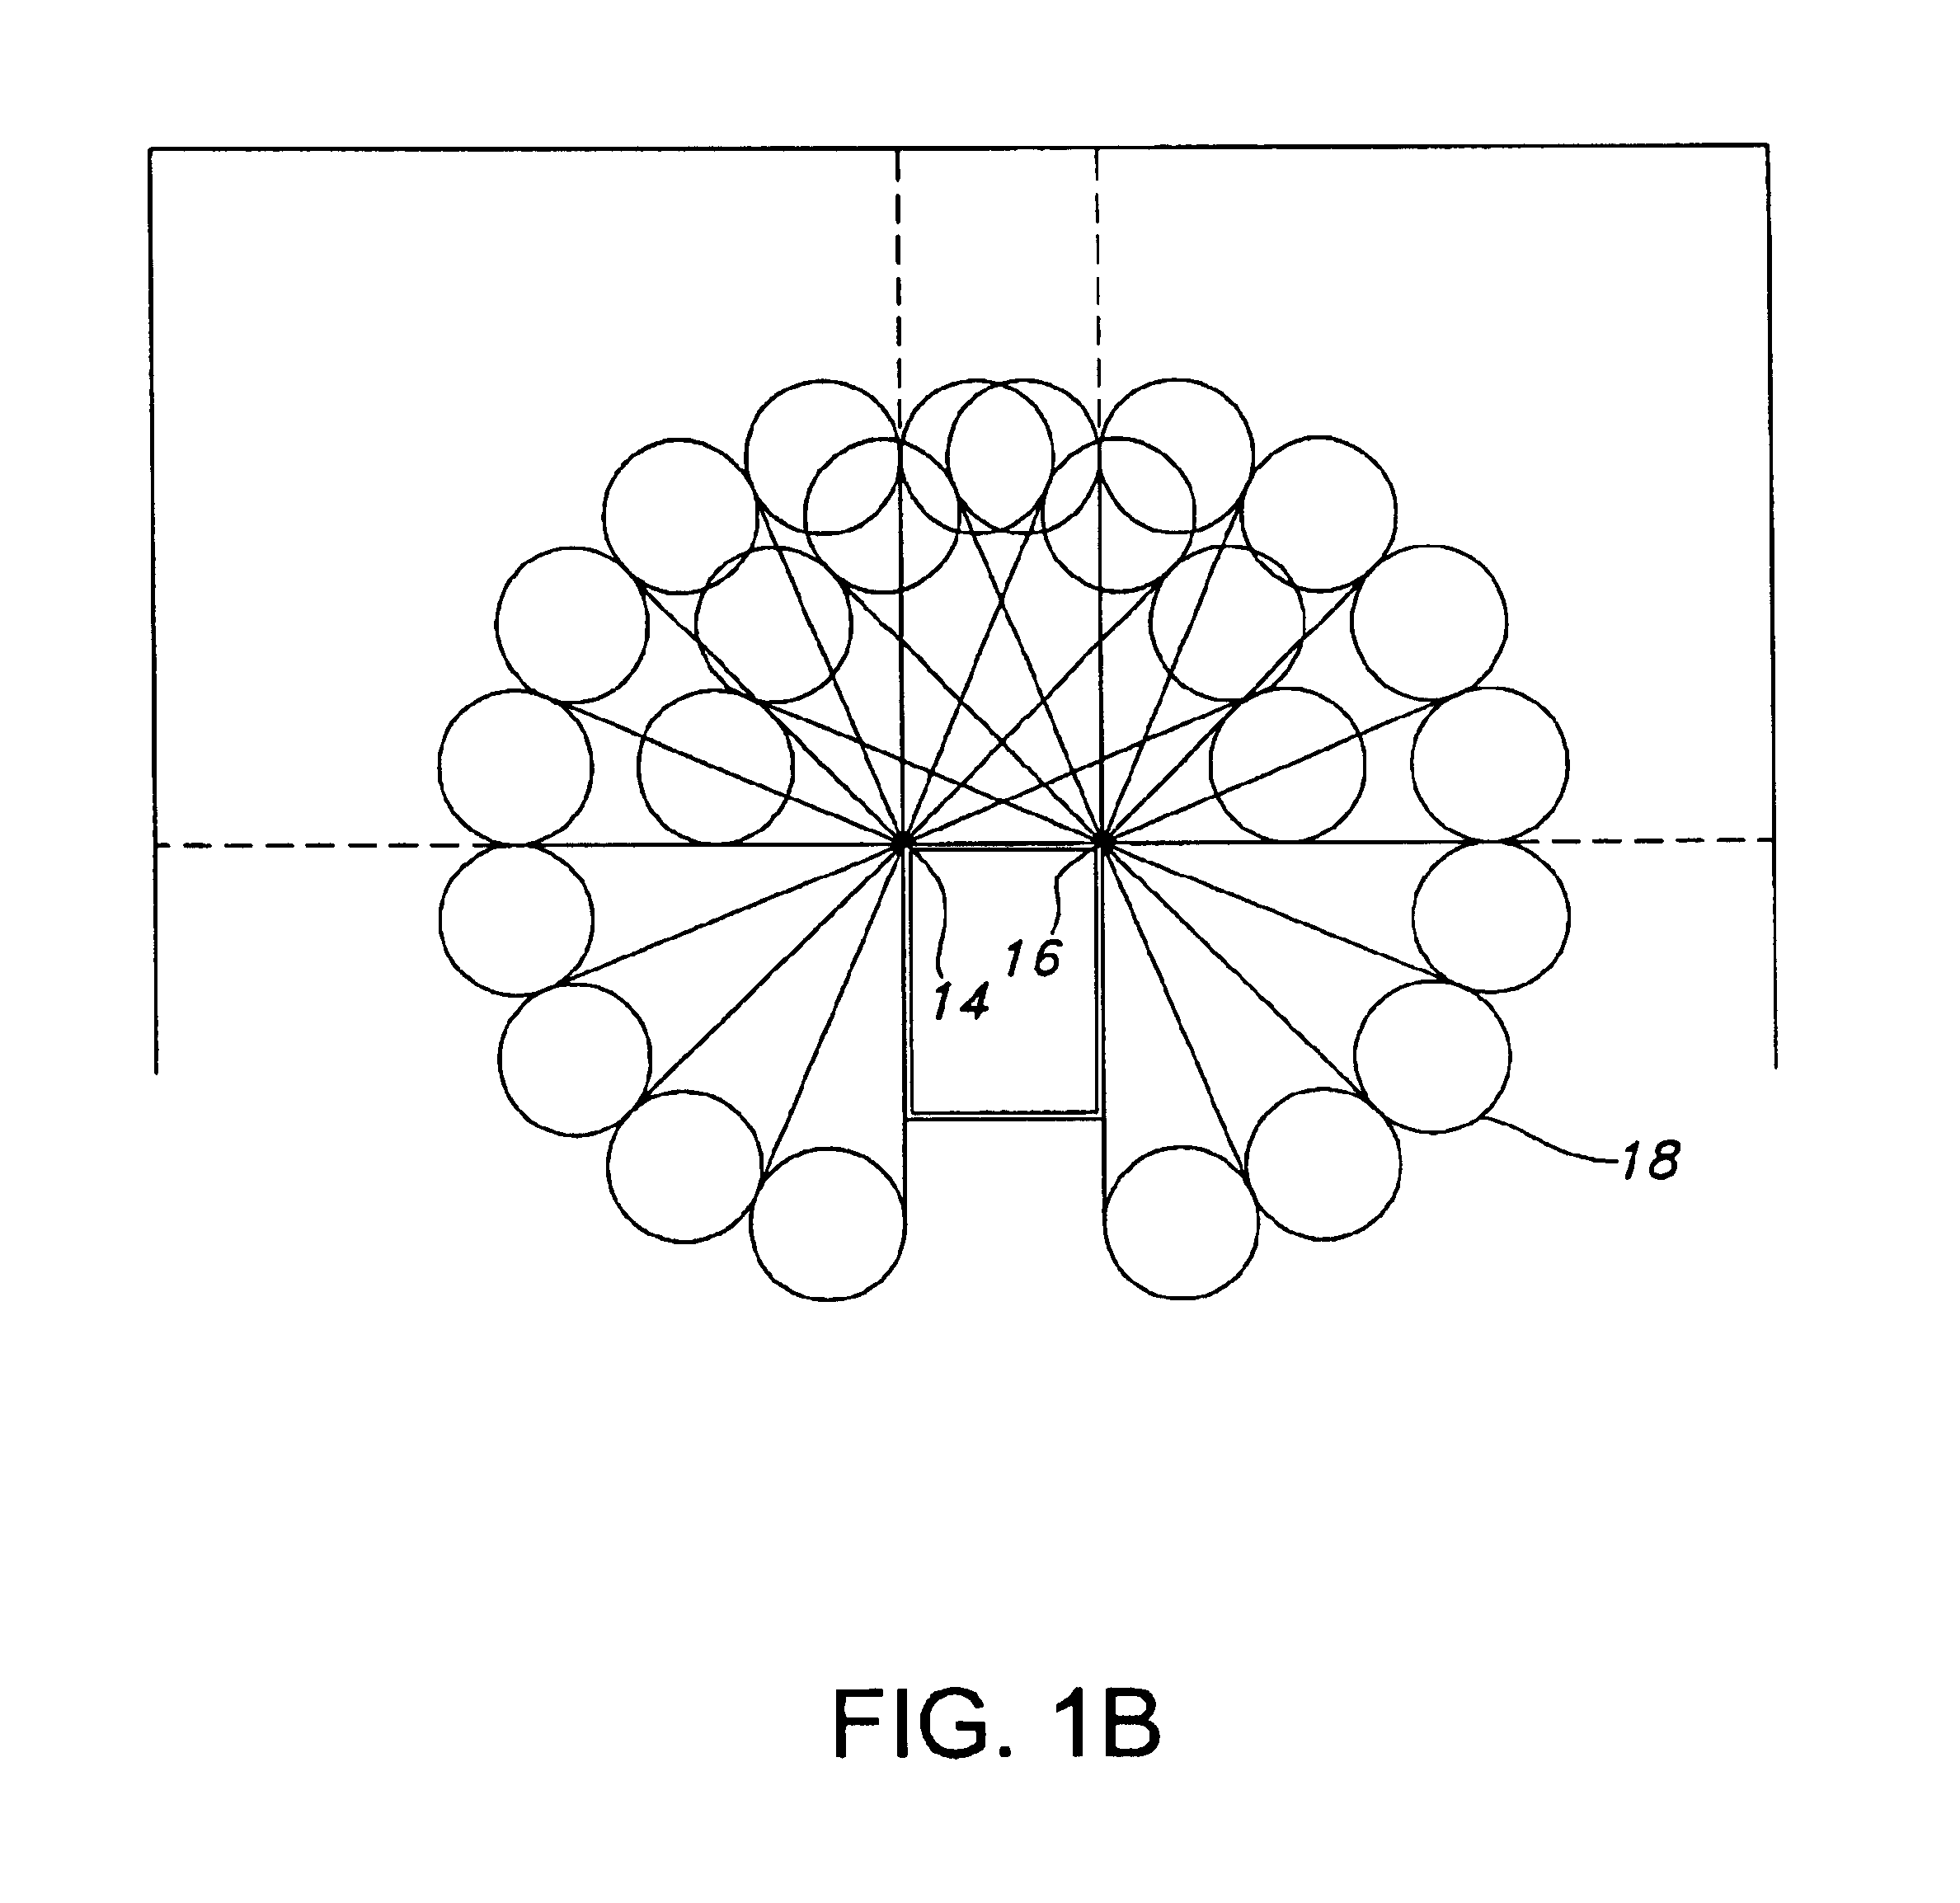 Method of controlling an external object sensor for an automotive vehicle